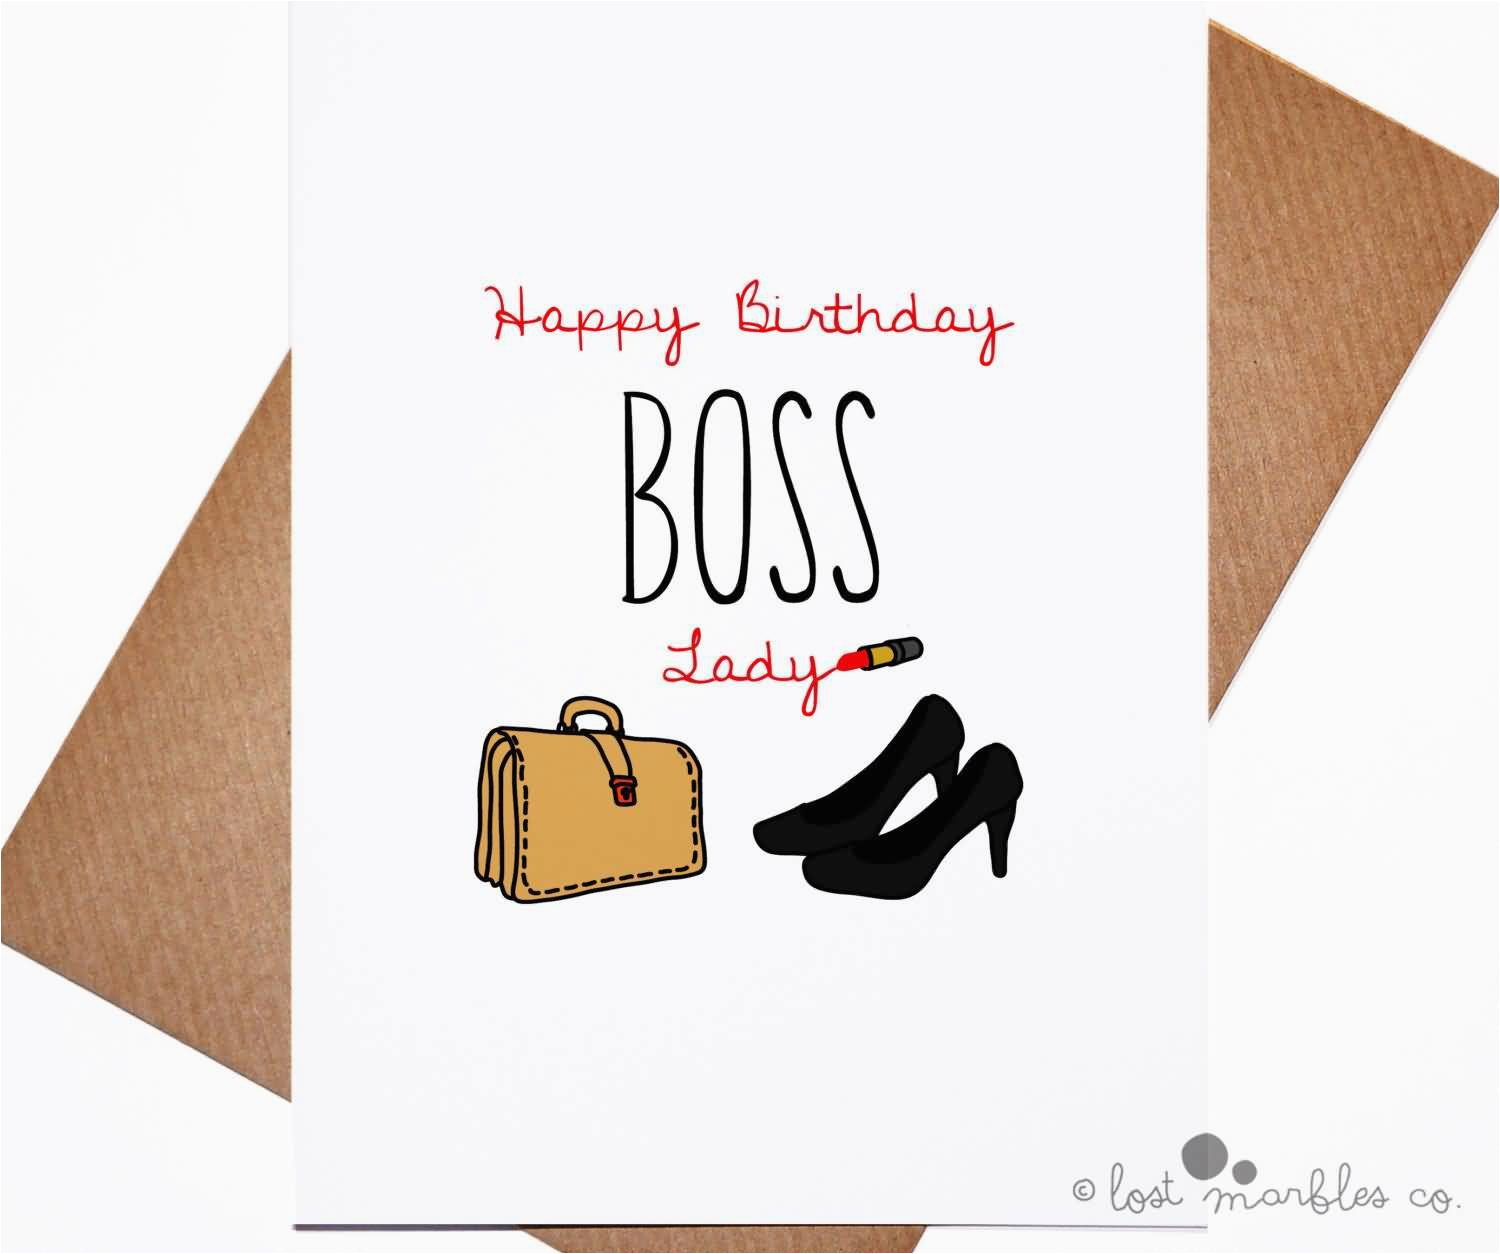 birthday-cards-for-boss-funny-birthday-wishes-for-boss-nicewishes-com